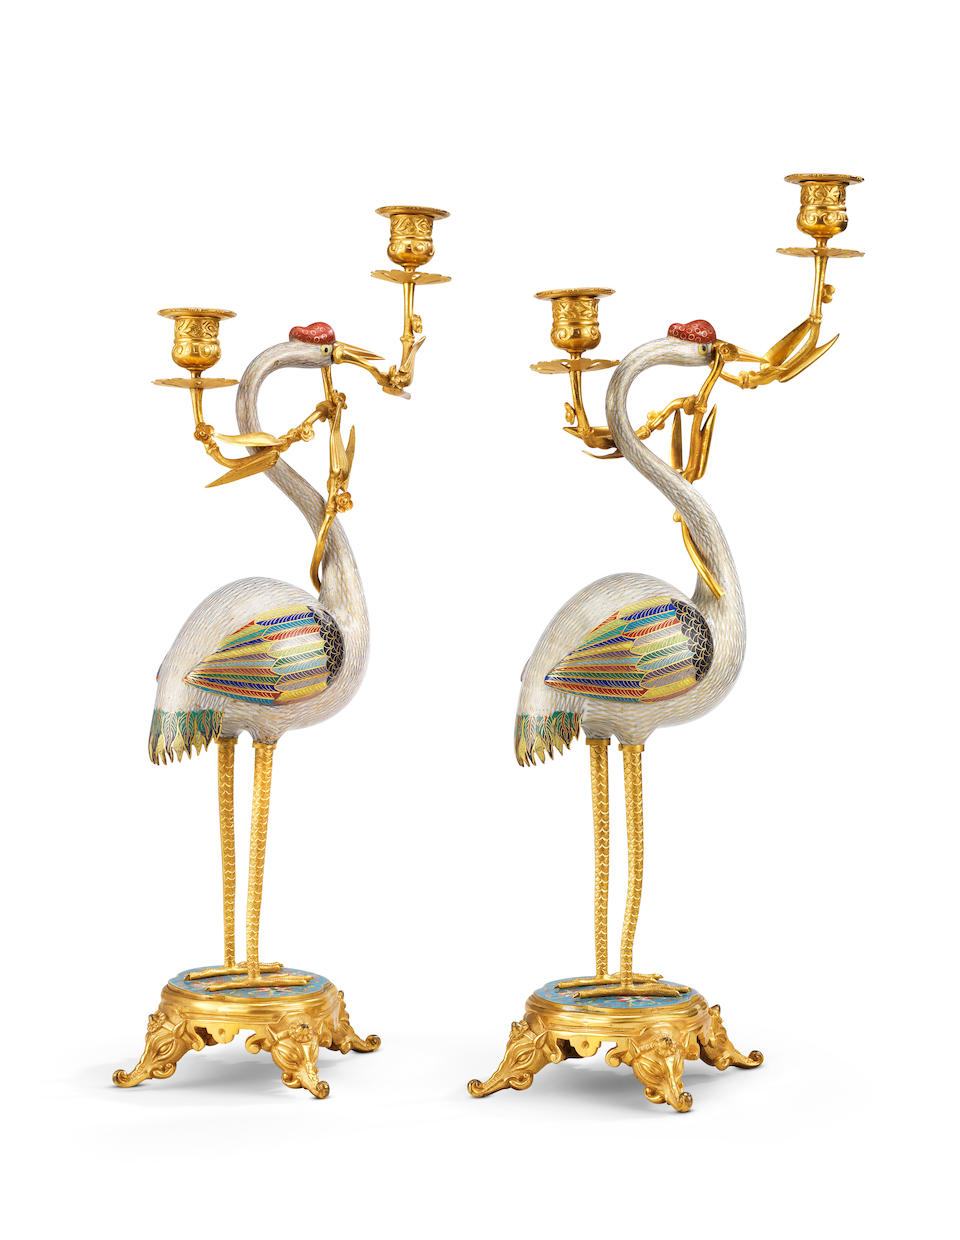 A fine pair of cloisonn&#233; enamel cranes Mid-Qing Dynasty, with French Barbedienne-style gilt-bronze mounts (2)